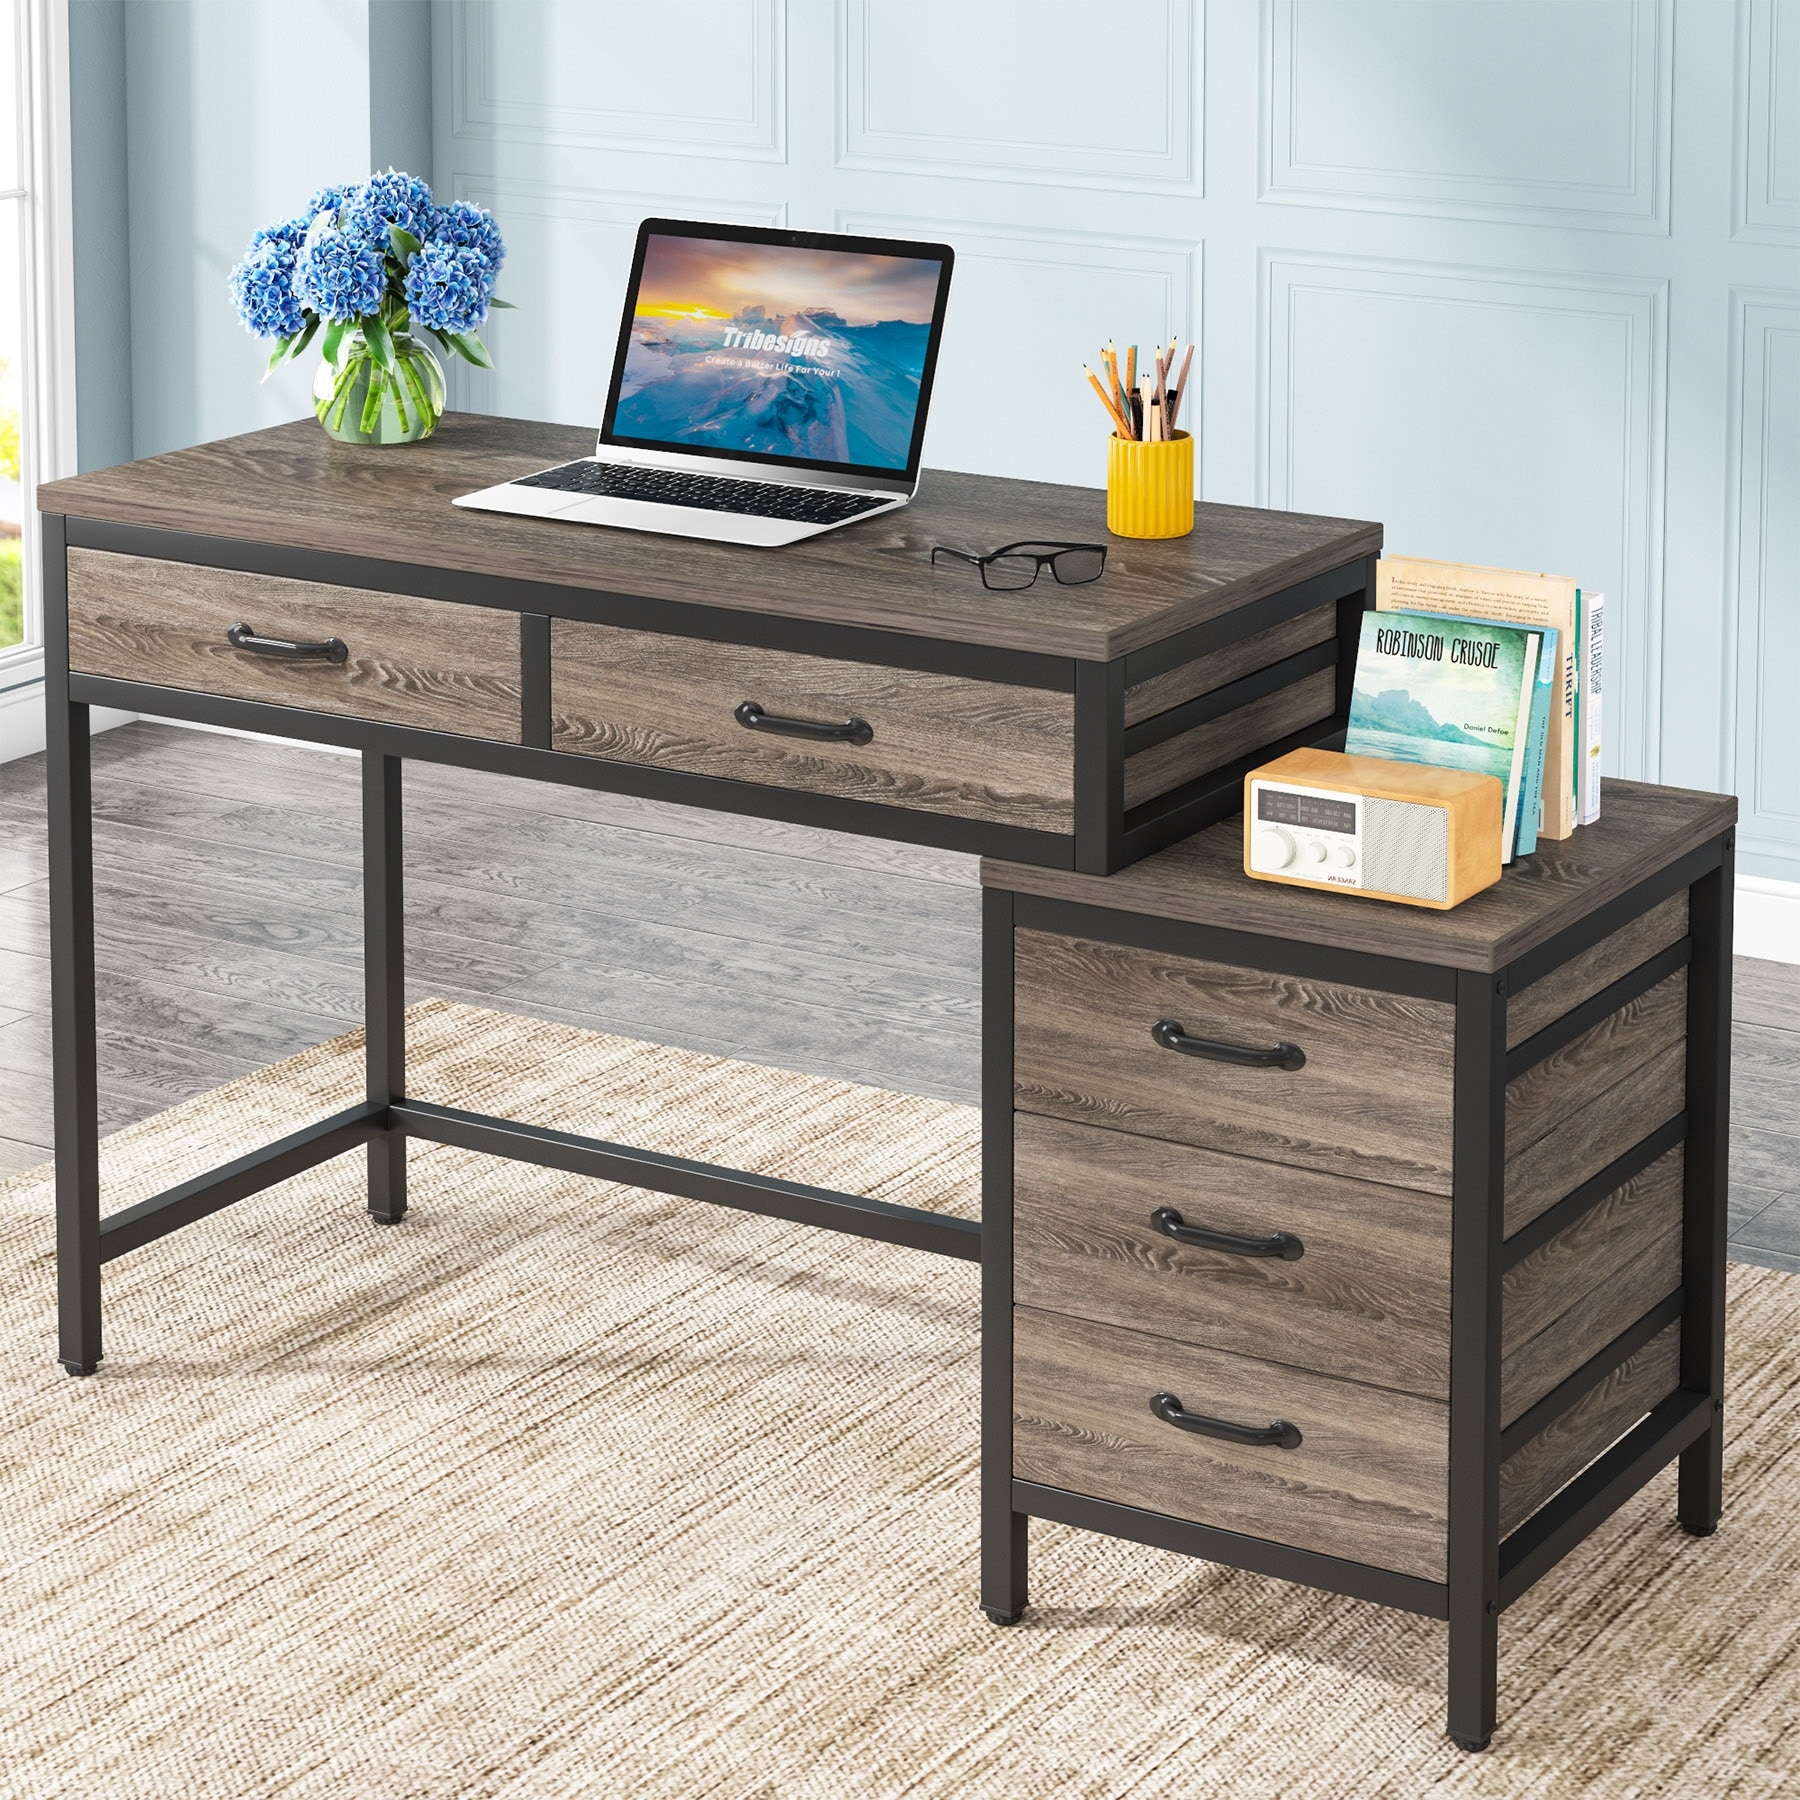 https://ak1.ostkcdn.com/images/products/is/images/direct/5d757a88912f427ab37f4548718e0d548dff4107/Reversible-Computer-Desk-with-5-Drawers%2C-Home-Office-Desk-with-File-Cabinet-Drawer-Printer-Stand.jpg